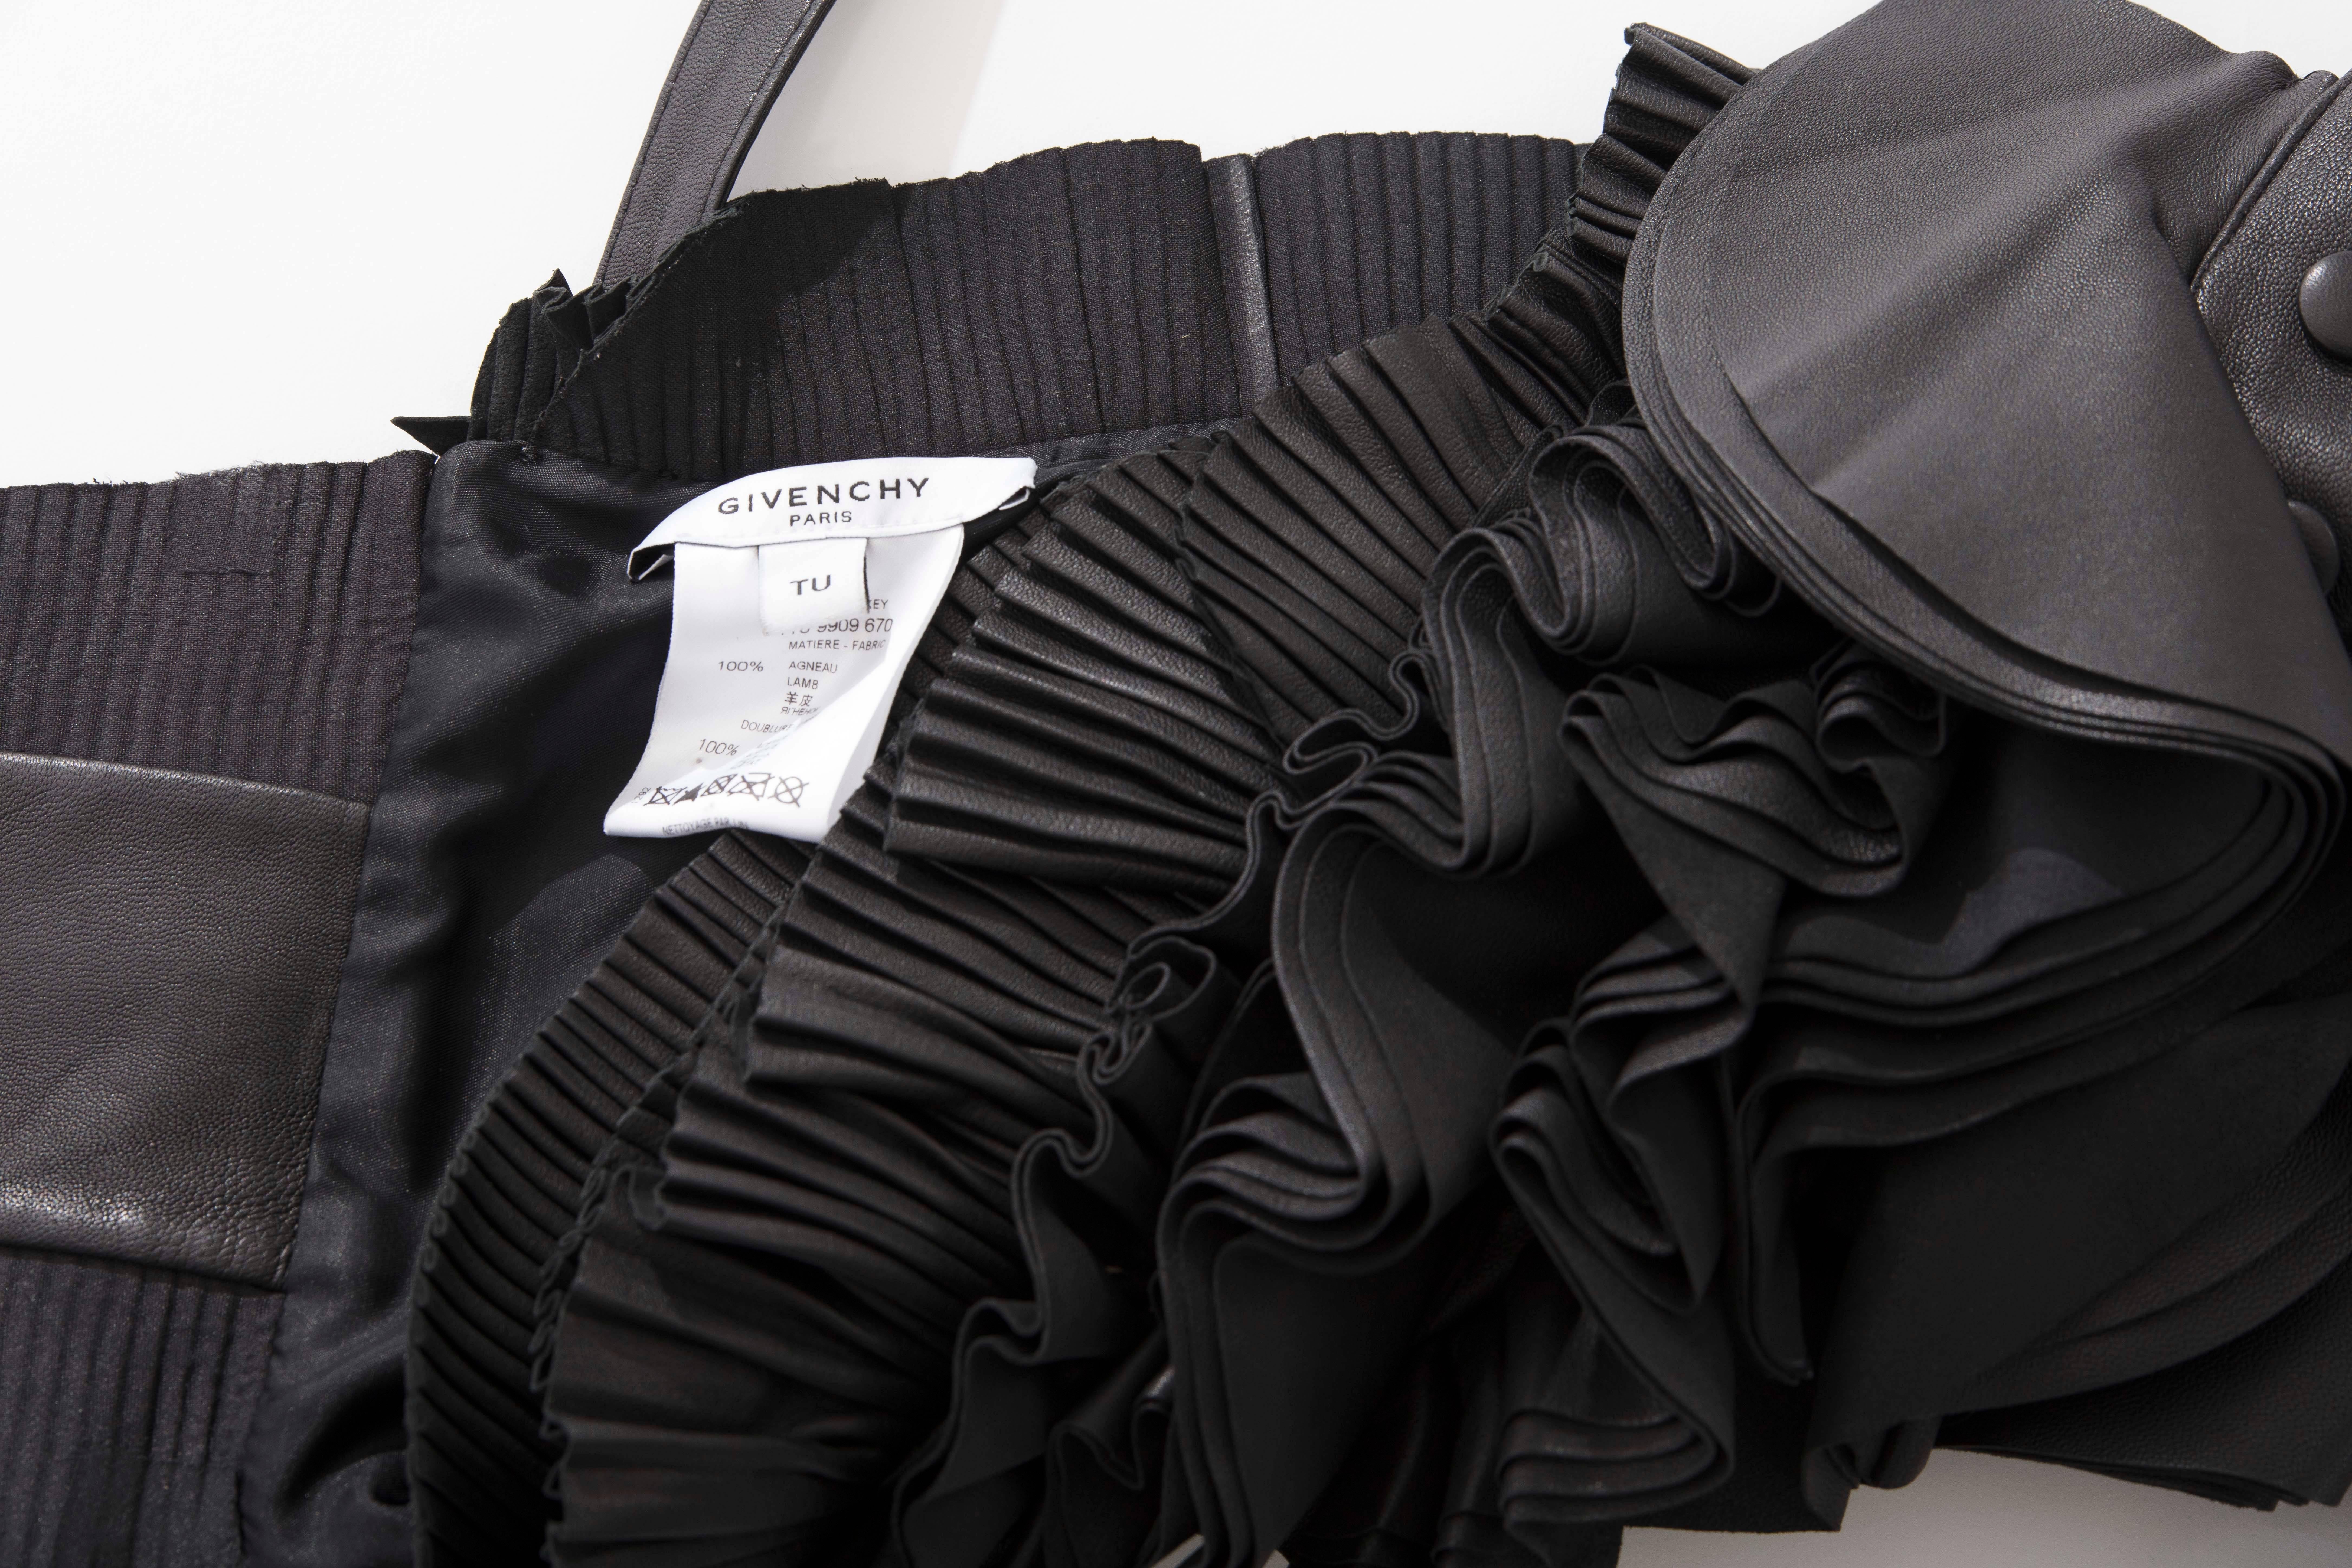 Givenchy by Riccardo Tisci Runway Black Leather Ruffled Harness Top, Spring 2011 4